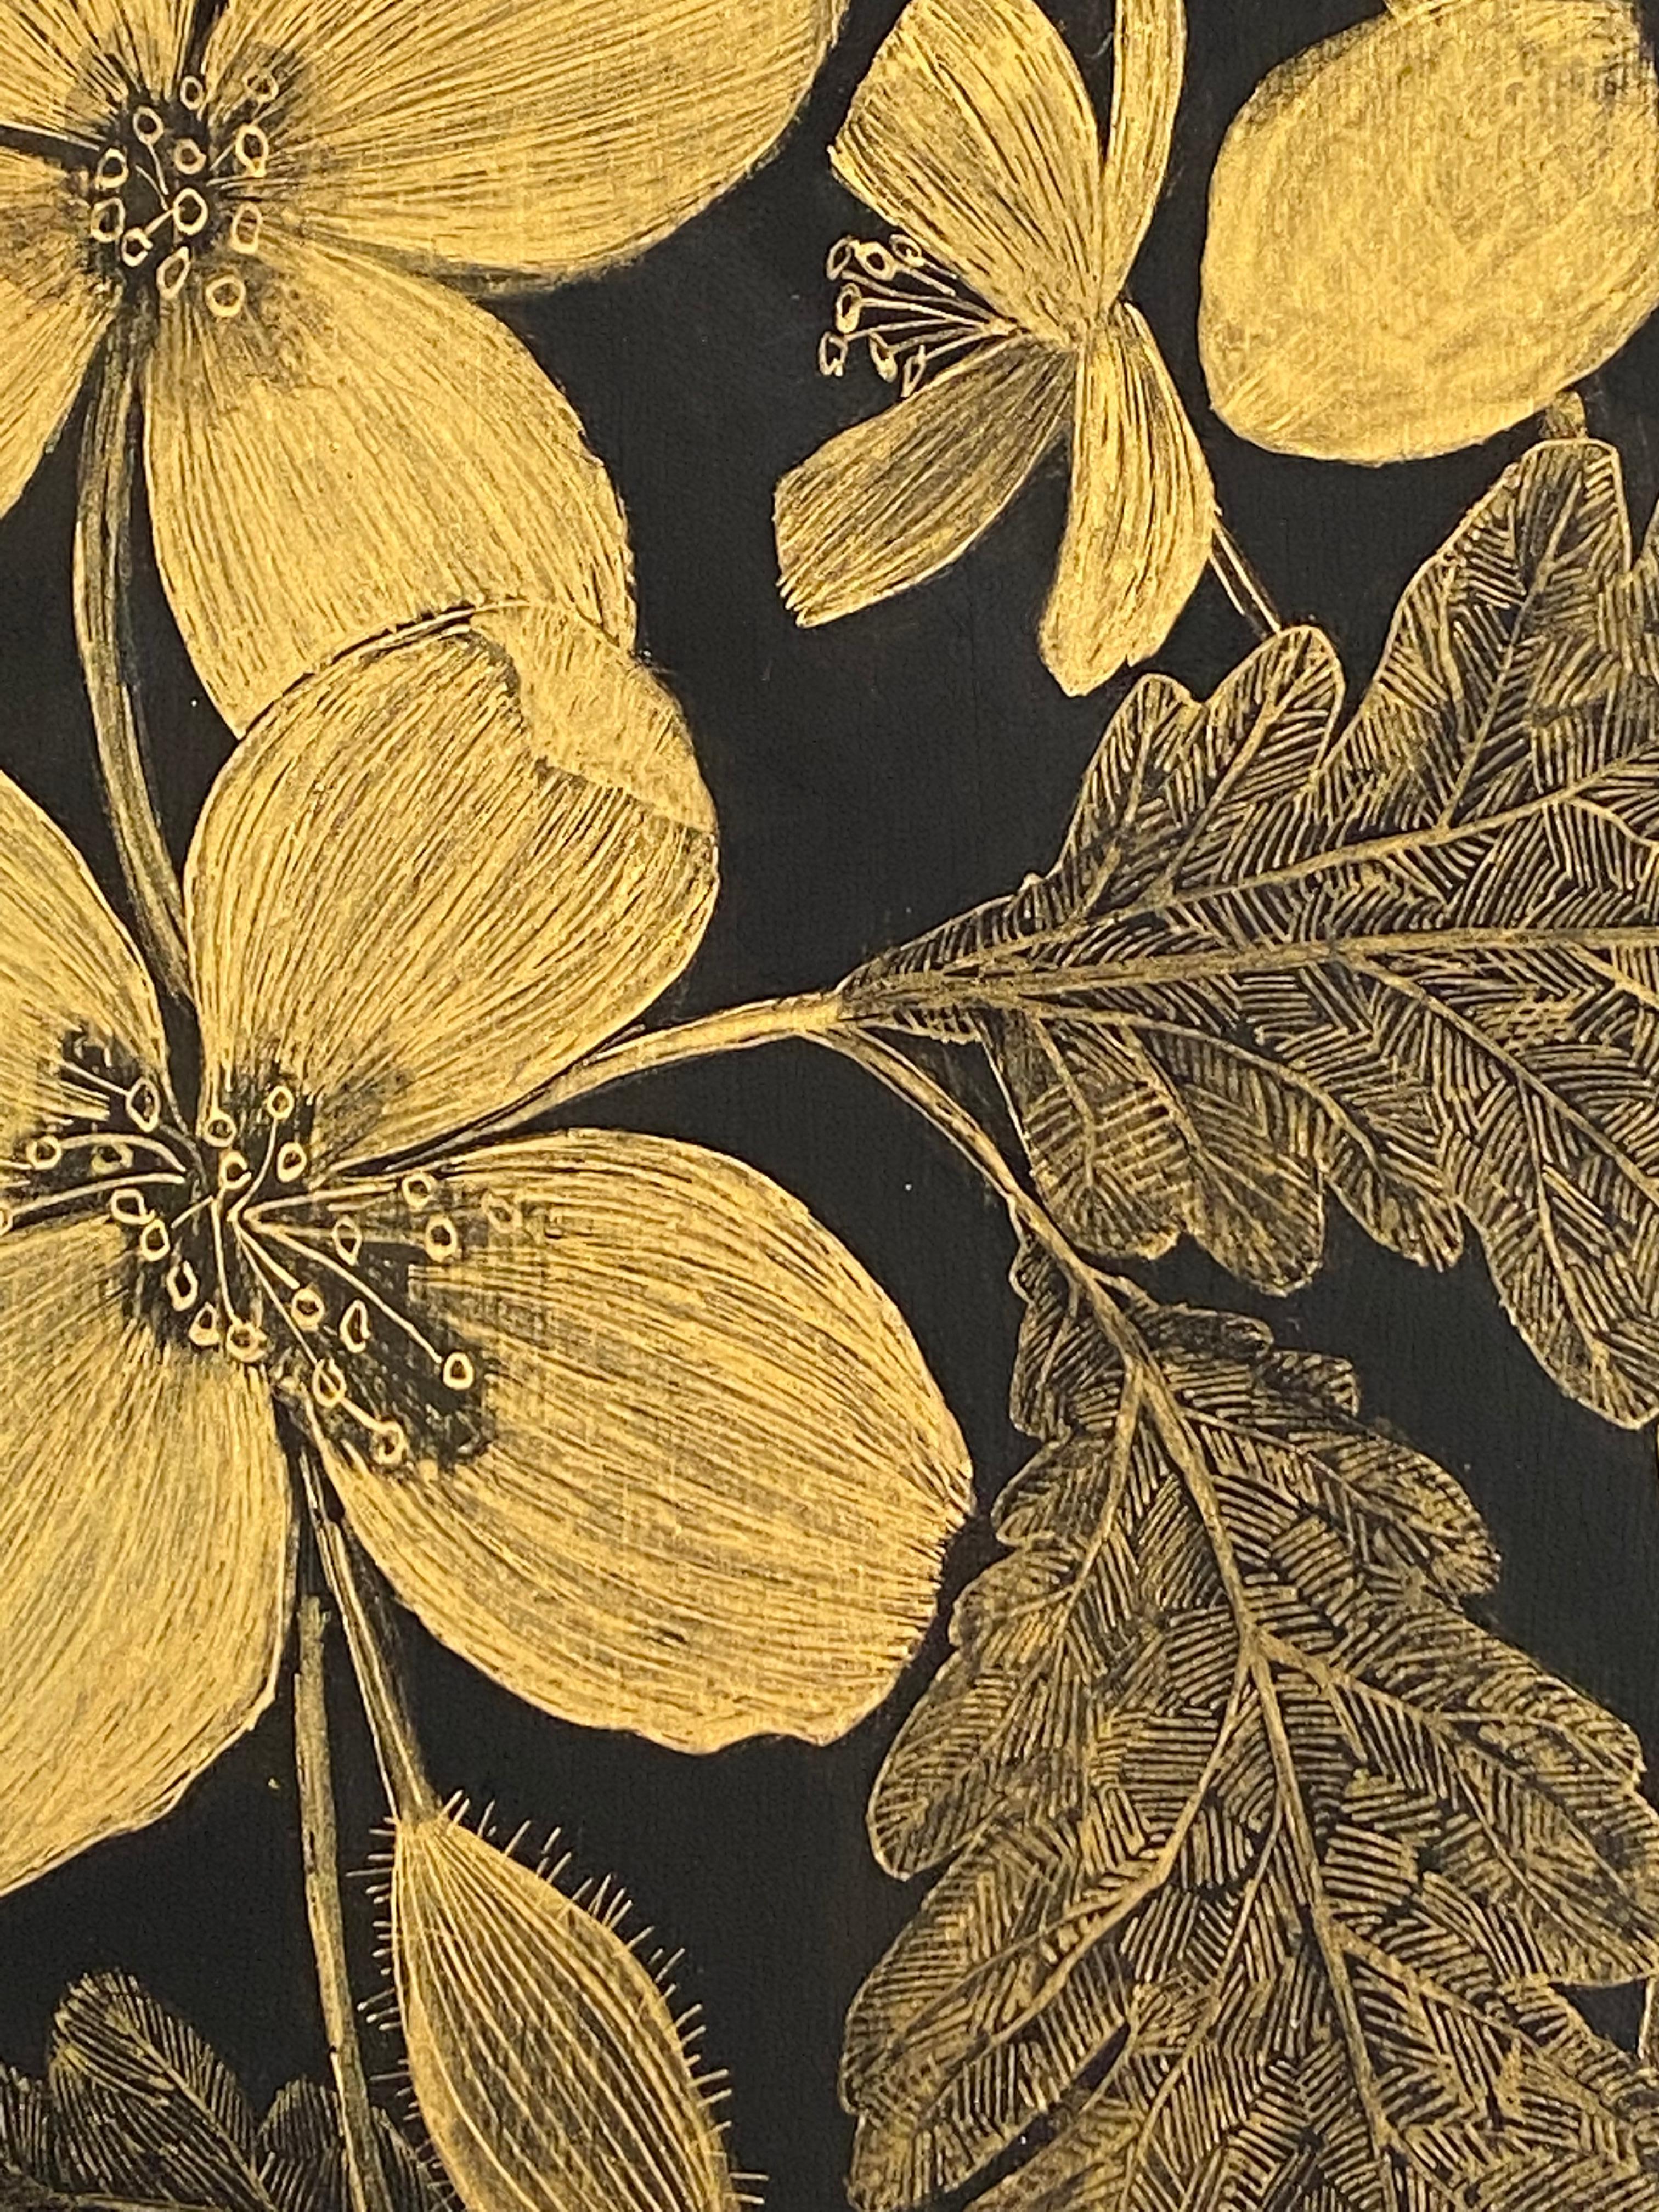 This delicate botanical drawing is made with gold acrylic on cradled panel, painted black. The exploration of ephemerality, and the fragility of a wild celandine flower, its leaves, petals and buds are the focus of this painting by Margot Glass. The